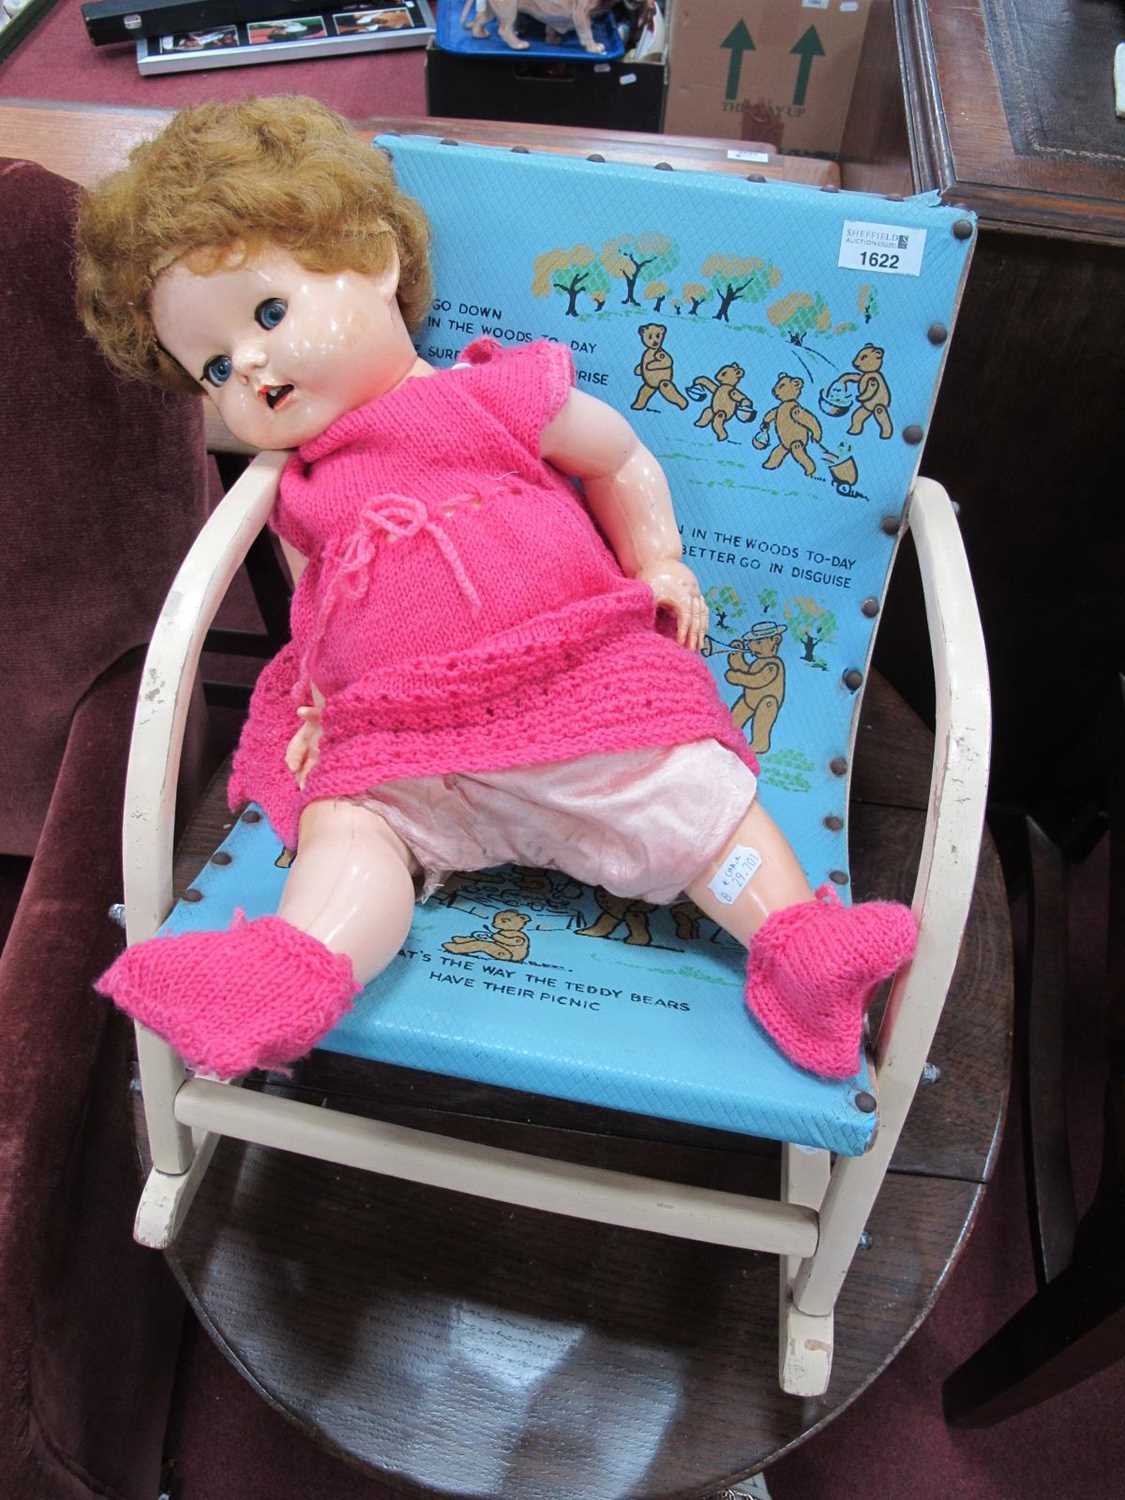 A Circa 1930's Child's Rocking Chair, the cover and seat inscribed with picture;s and word from 'The